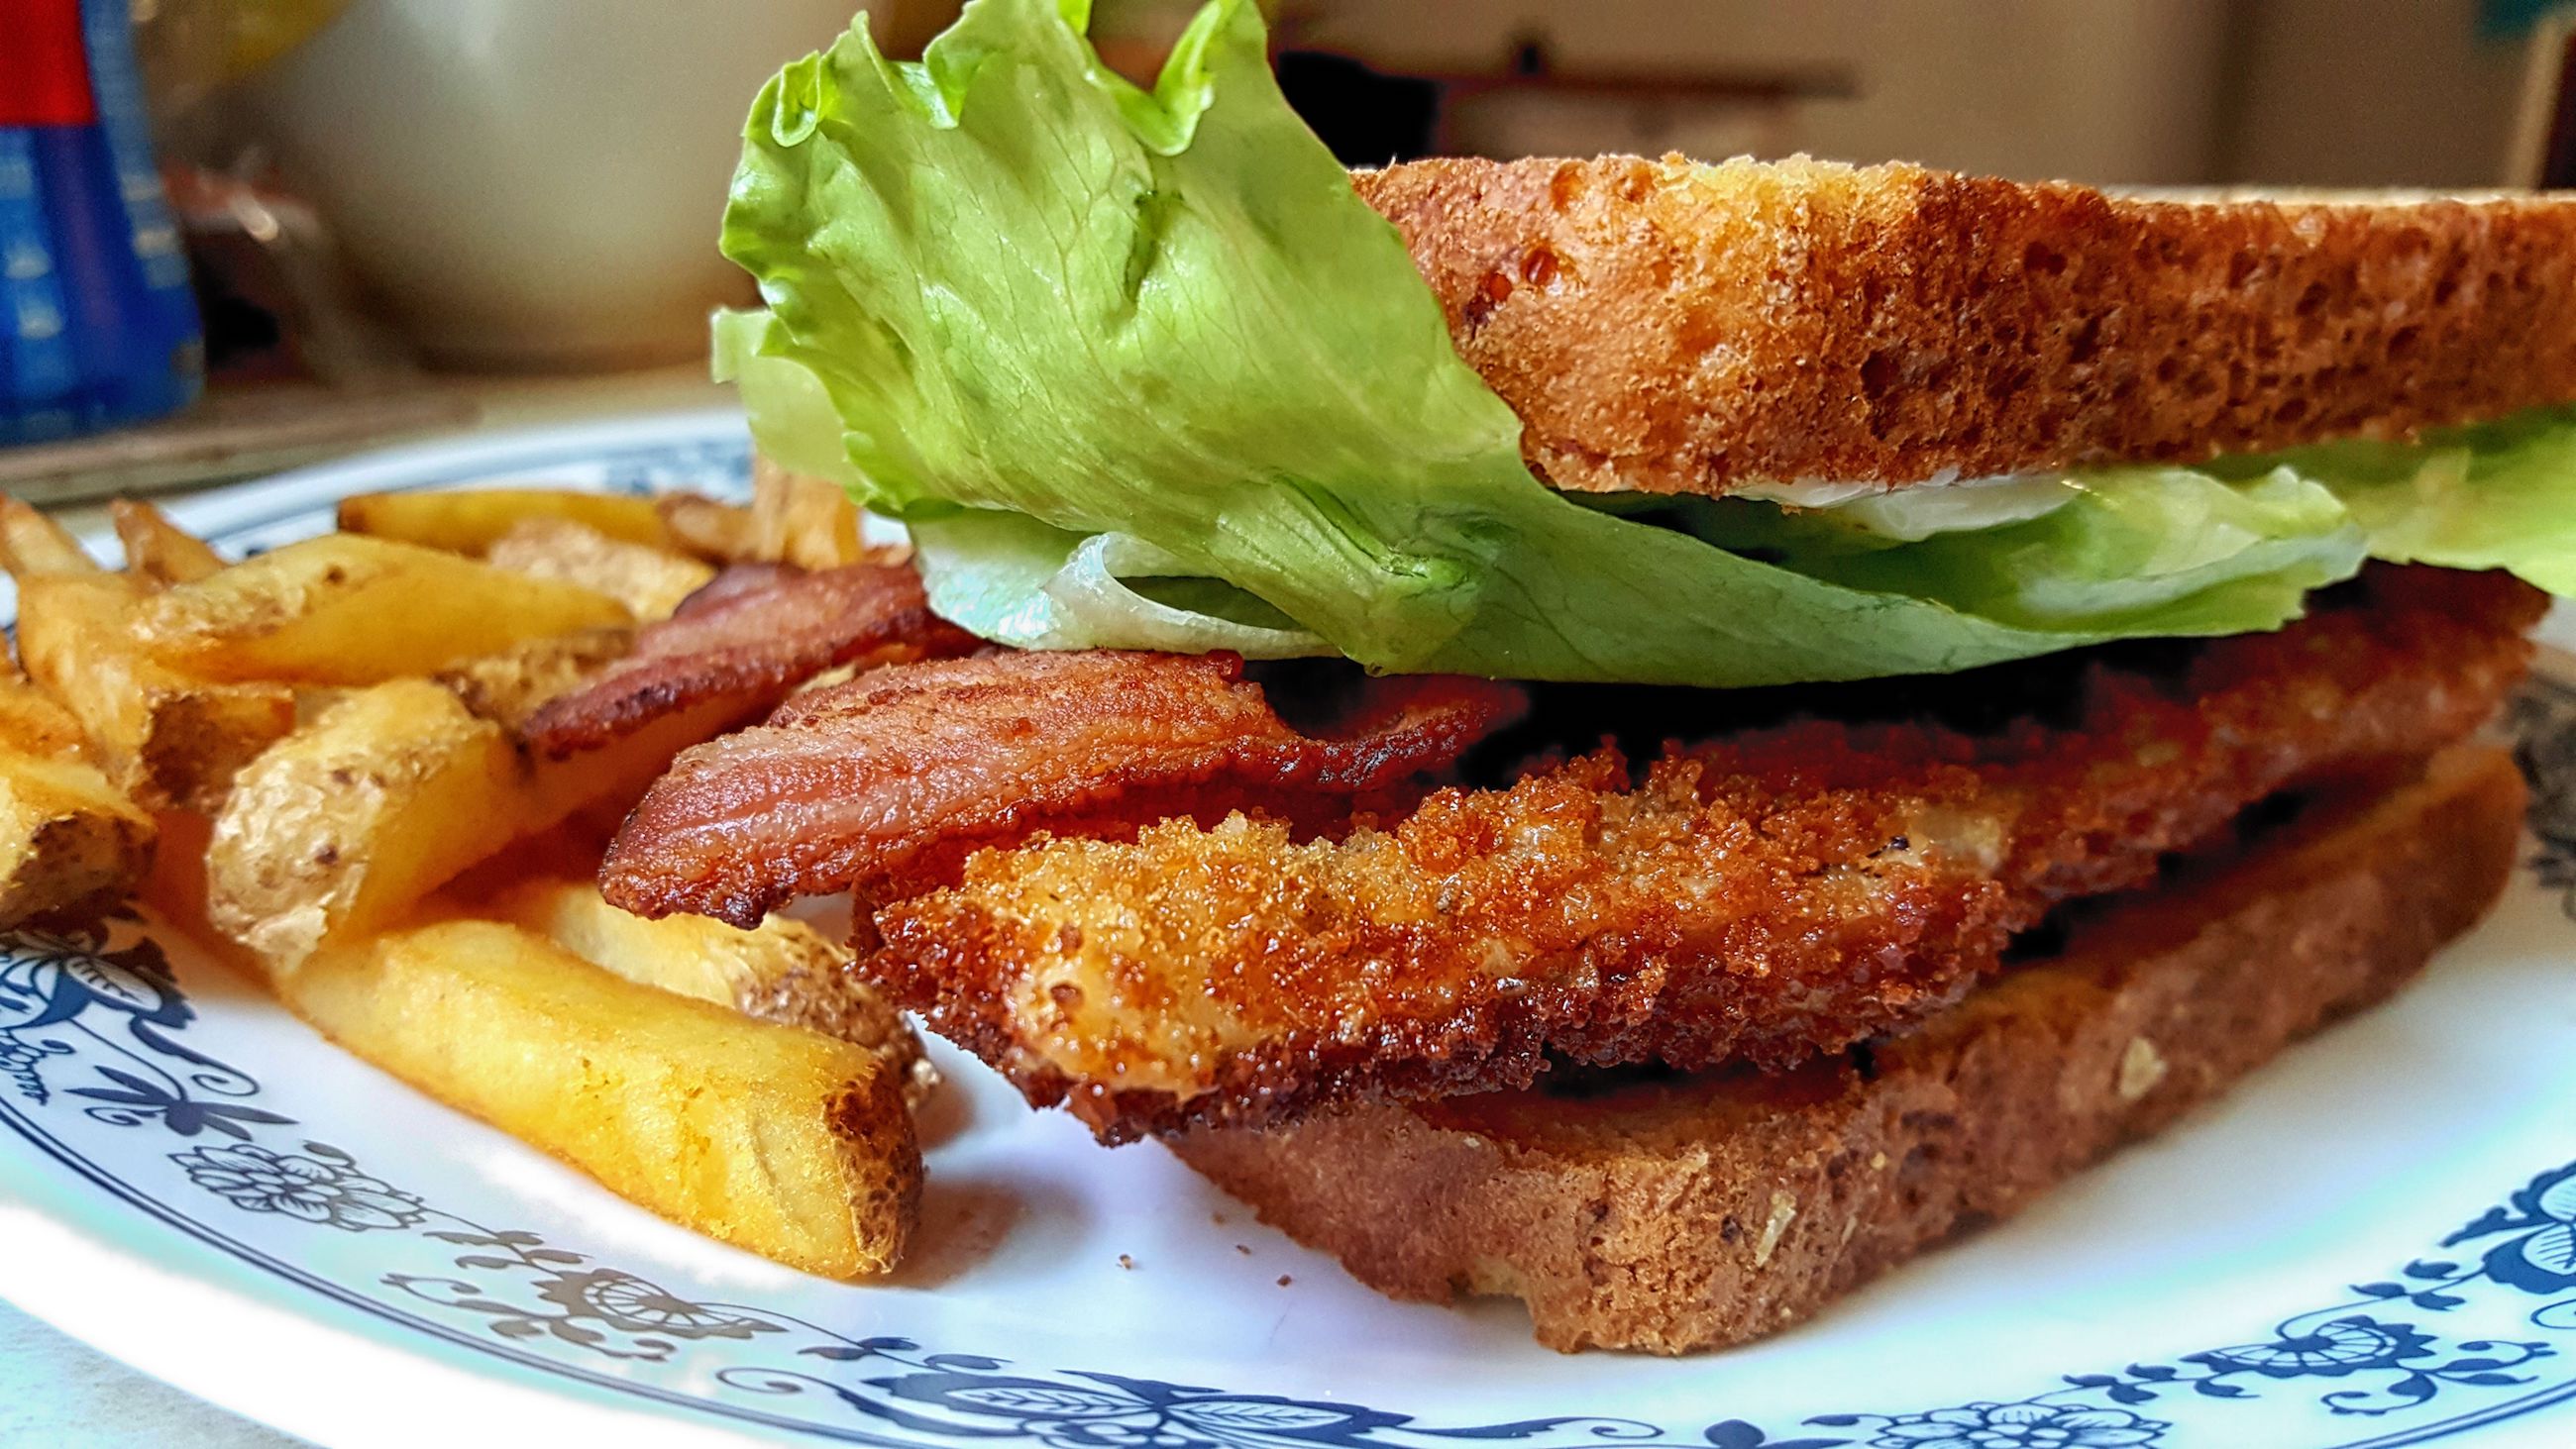 Chicken schnitzel with mayo, lettuce, and bacon